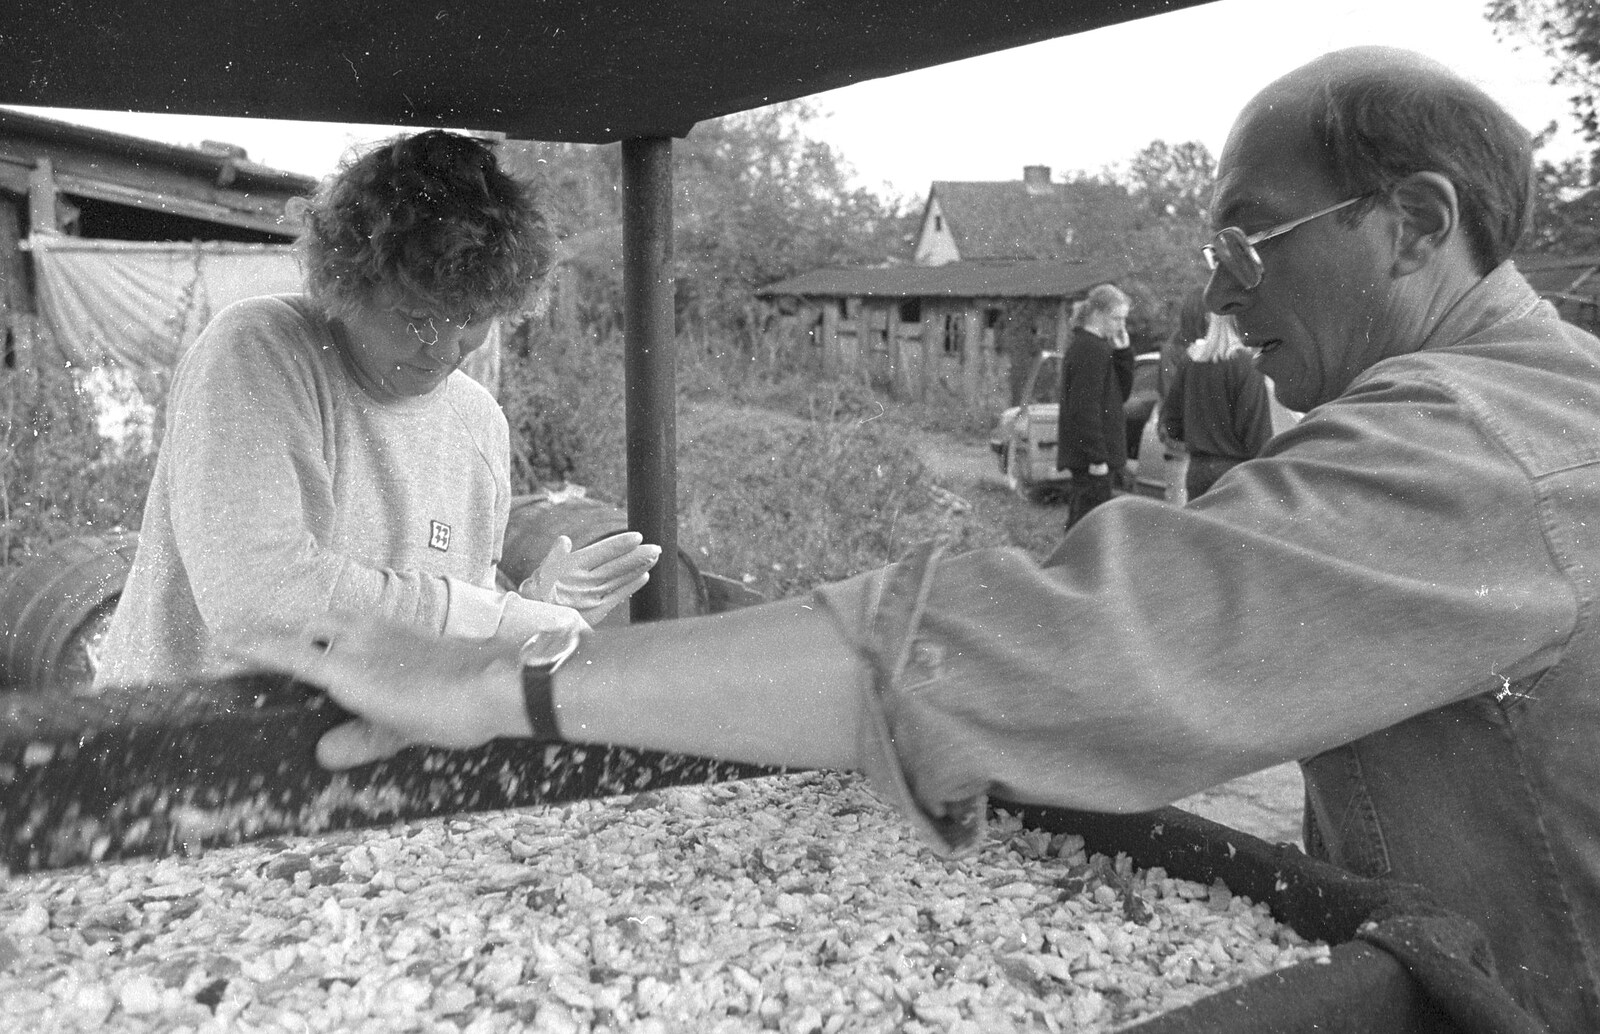 Kipper tamps down the apples inside a 'cheese' from Cider Making in Black and White, Stuston, Suffolk - 11th October 1992